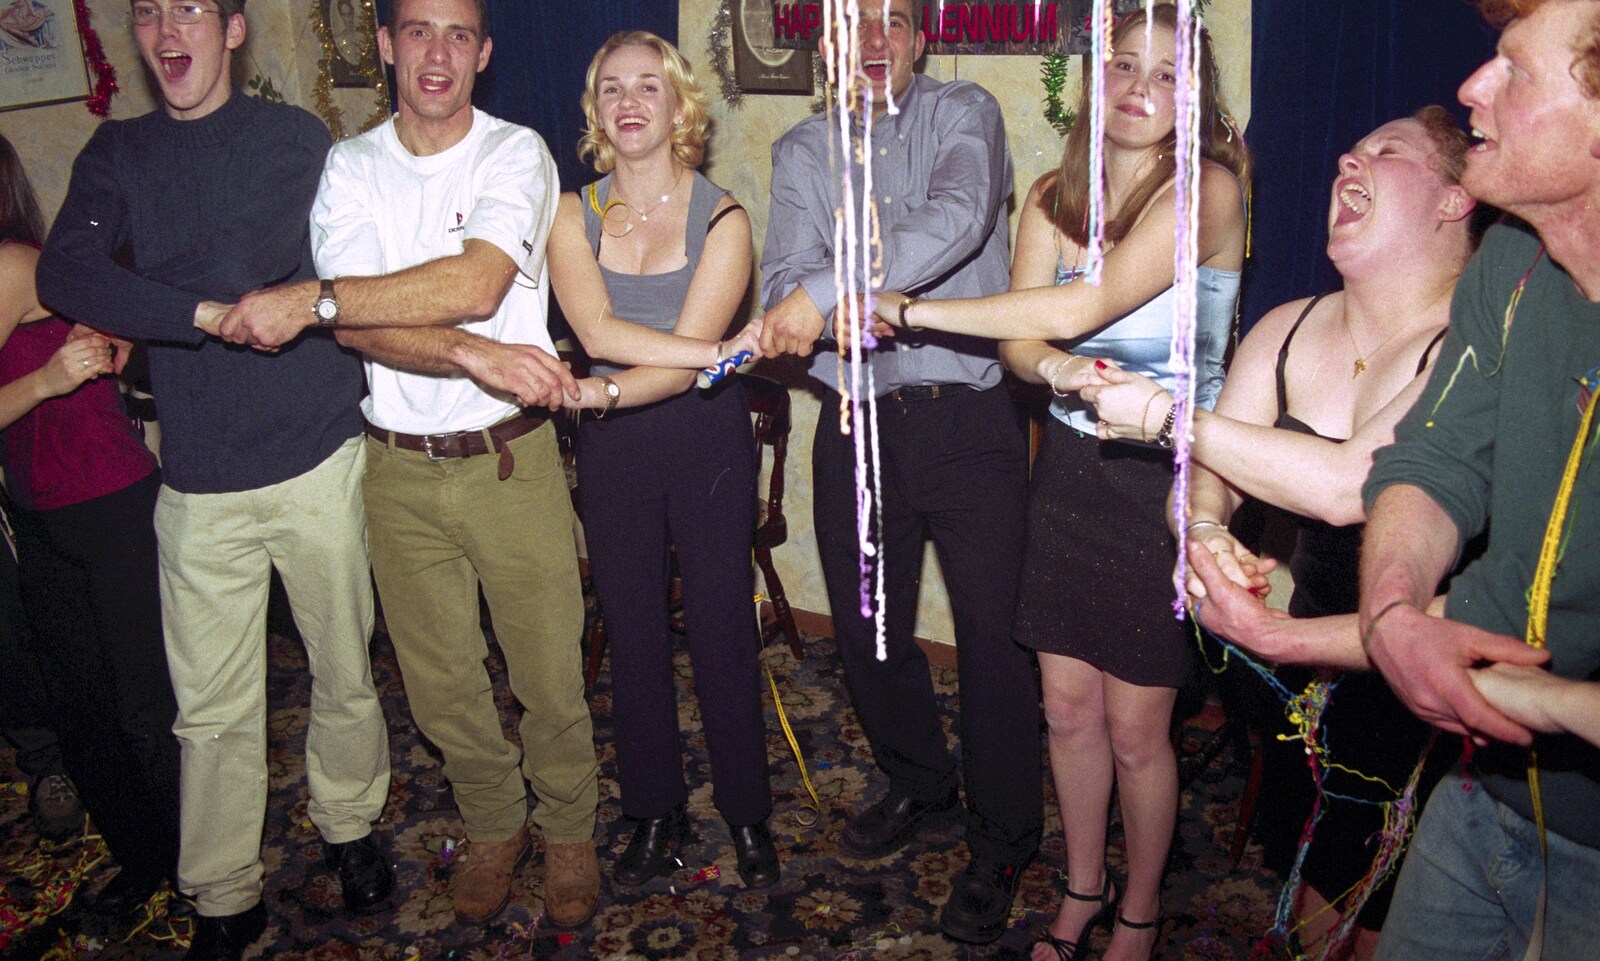 Some robust singing occurs from New Year's Eve at The Swan Inn, Brome, Suffolk - 31st December 1999